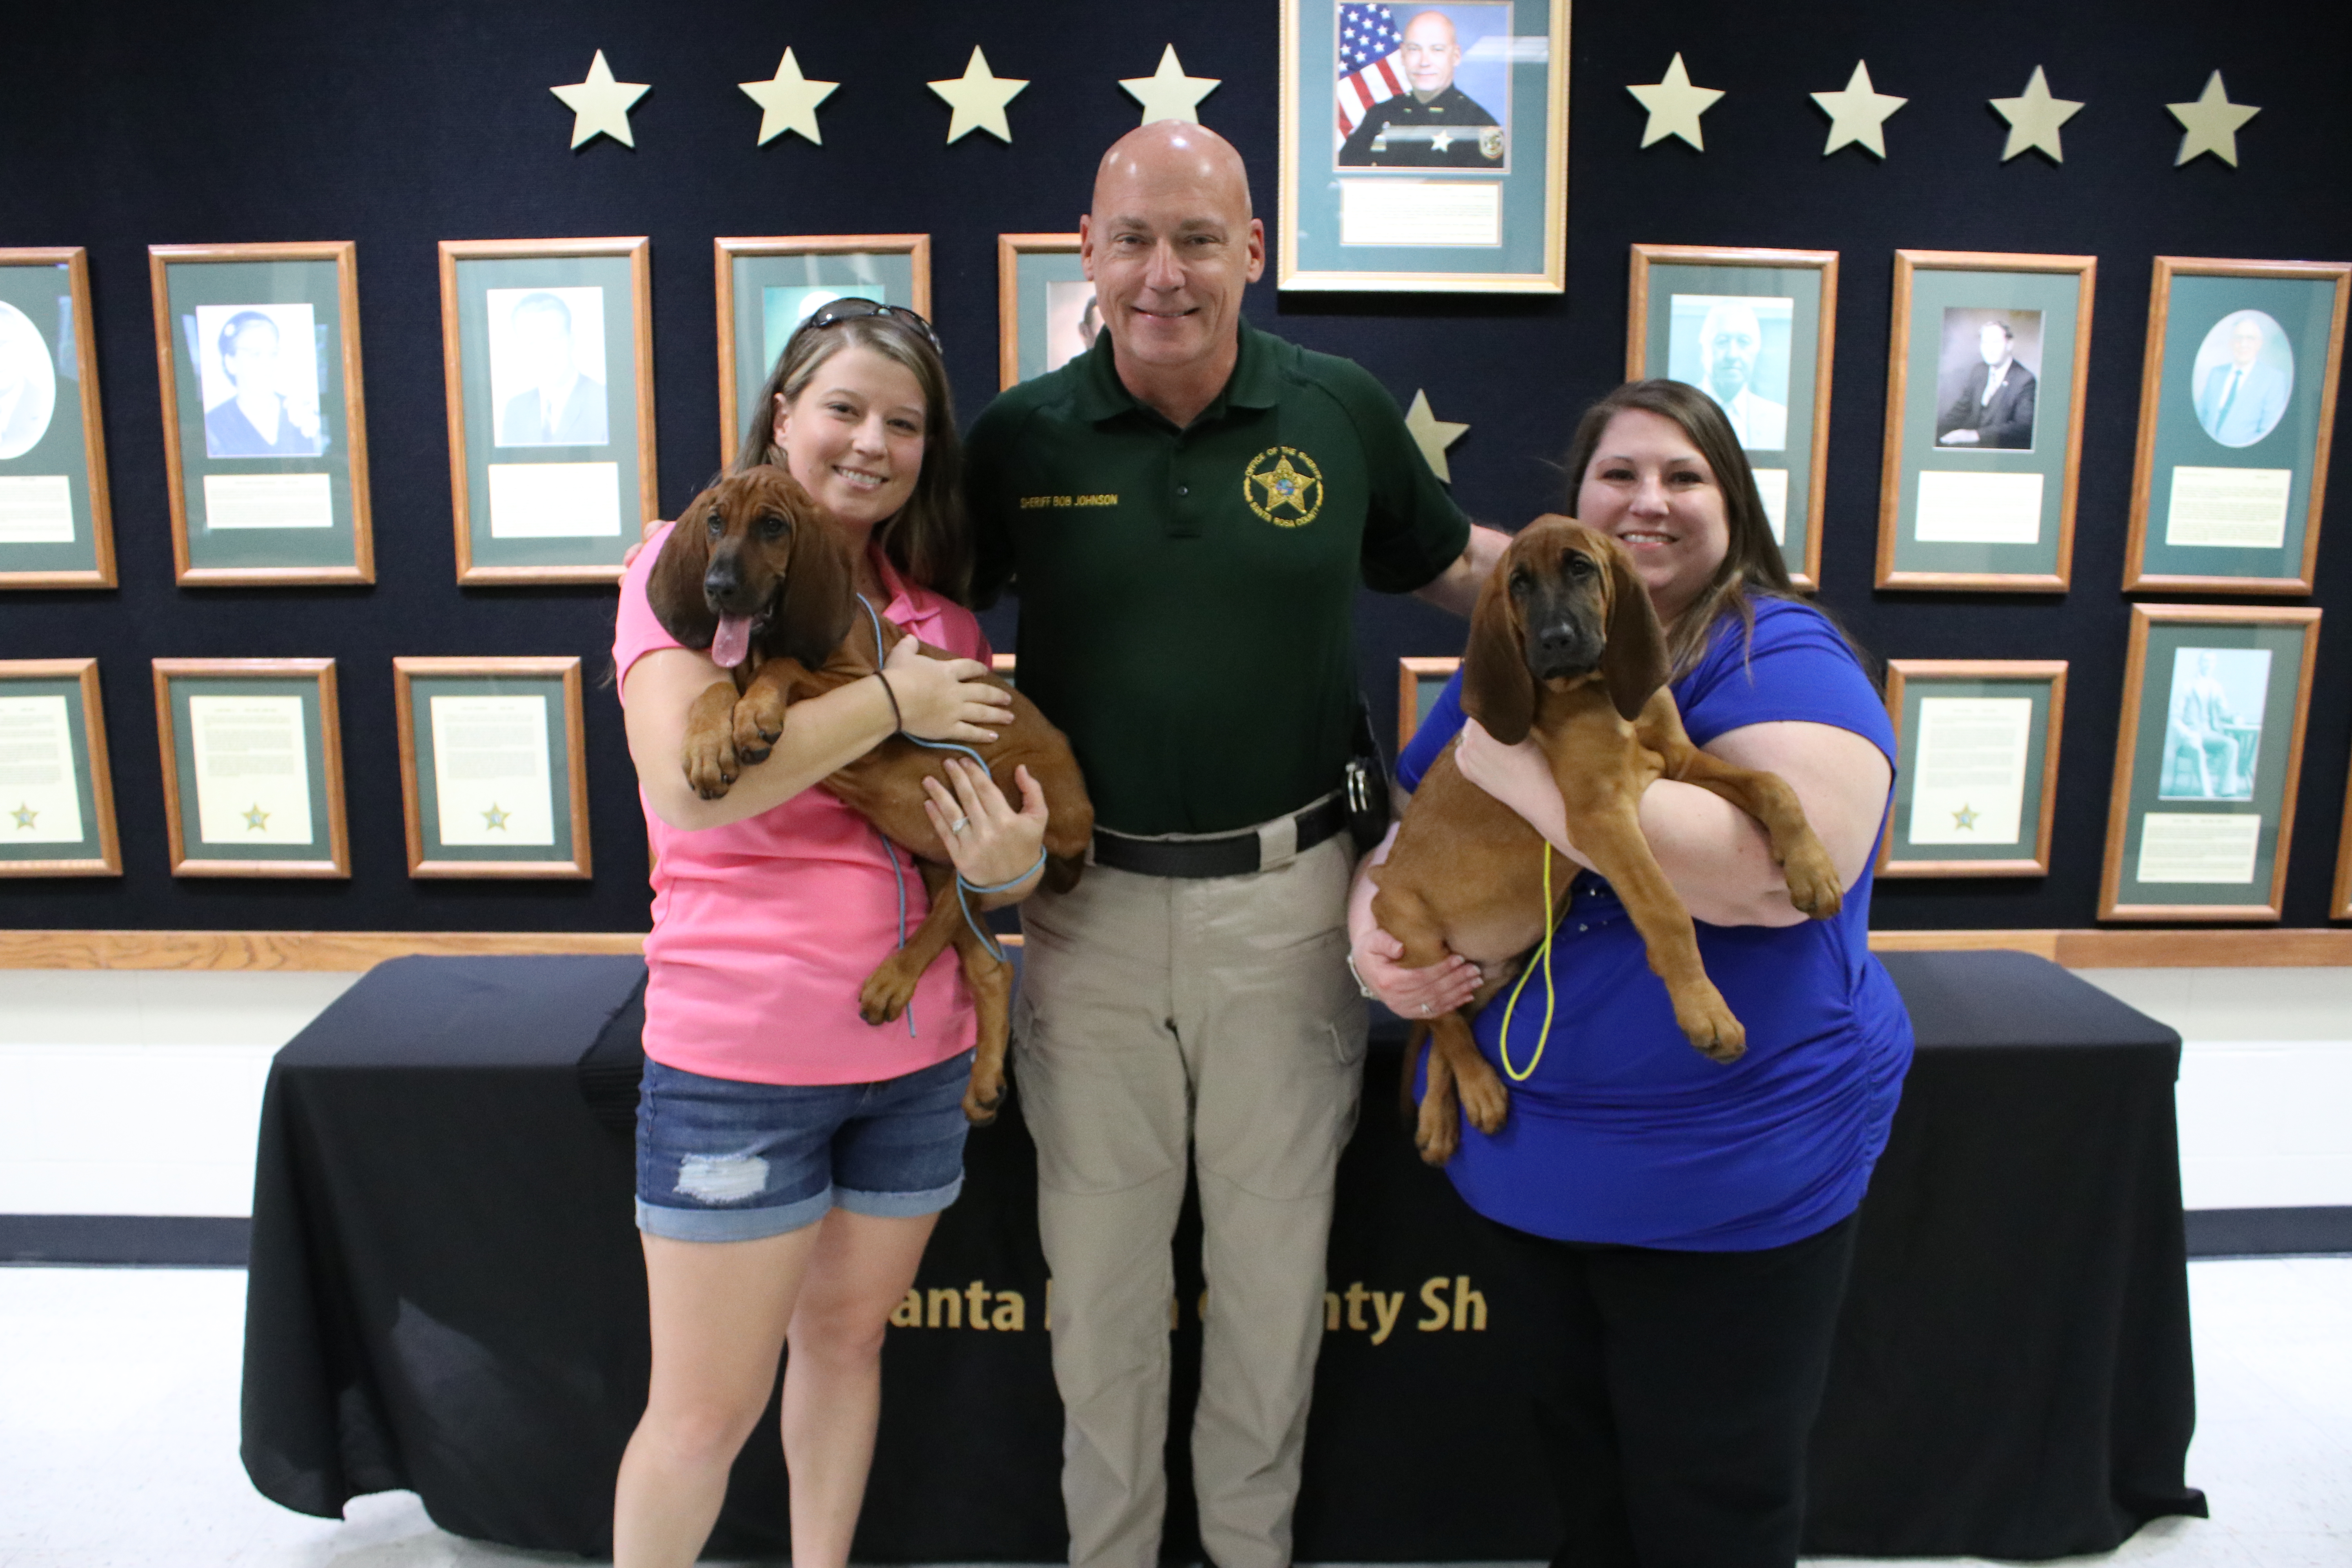 Two women and a sheriff holding puppies stand in front of a wall displaying commemorative plaques and stars.